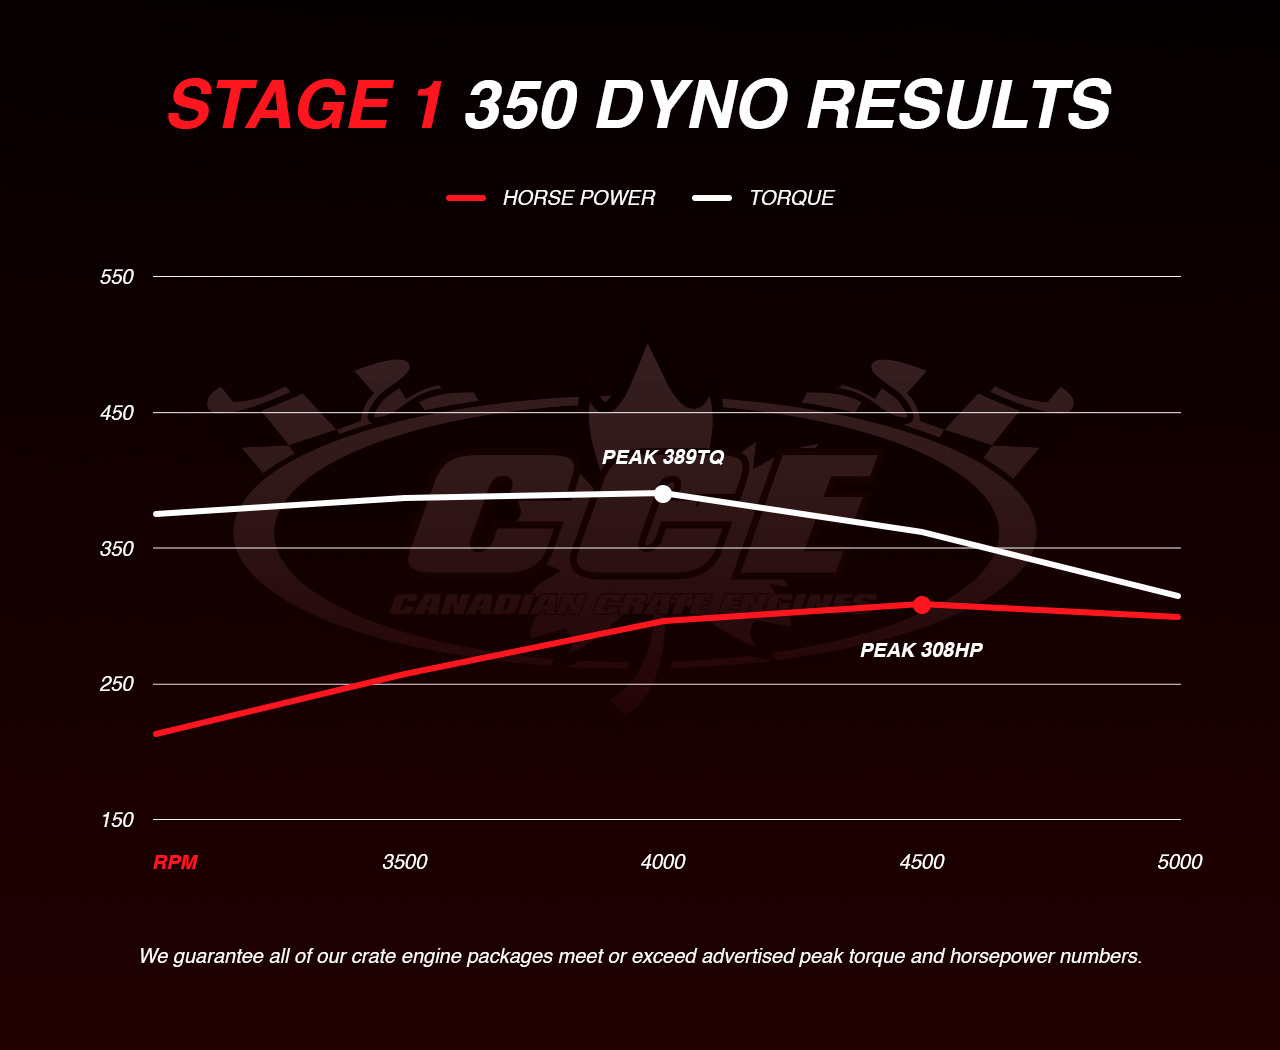 Dyno Graph Results for Chevy Stage 1 showing peak torque of 389TQ and peak horsepower of 308HP